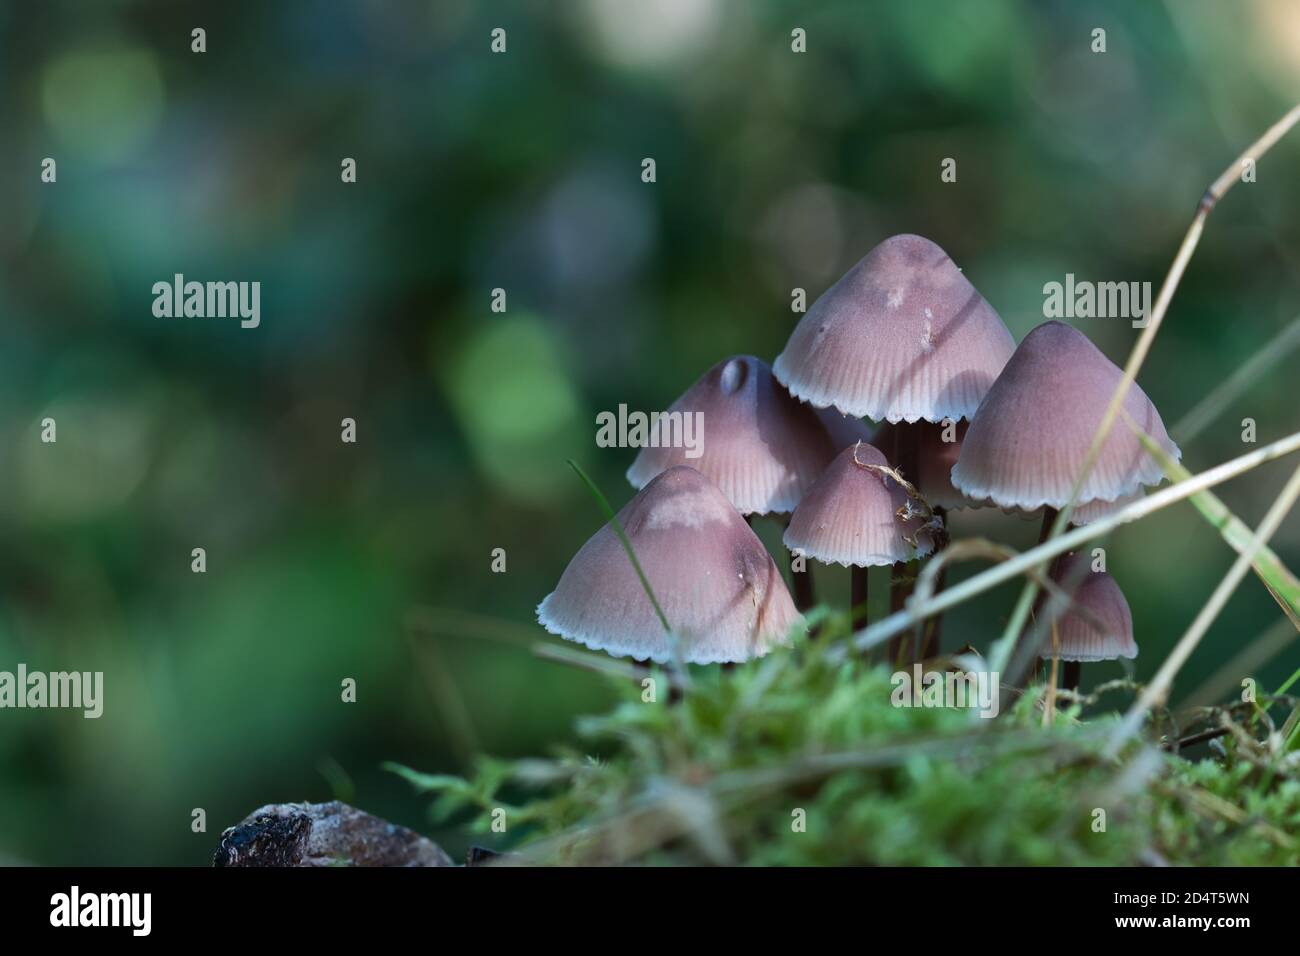 Oak-stump bonnet cap mushrooms growing in the cluster, pale reddish and brown caps, green moss on the foreground, blurred bokeh fall season background Stock Photo